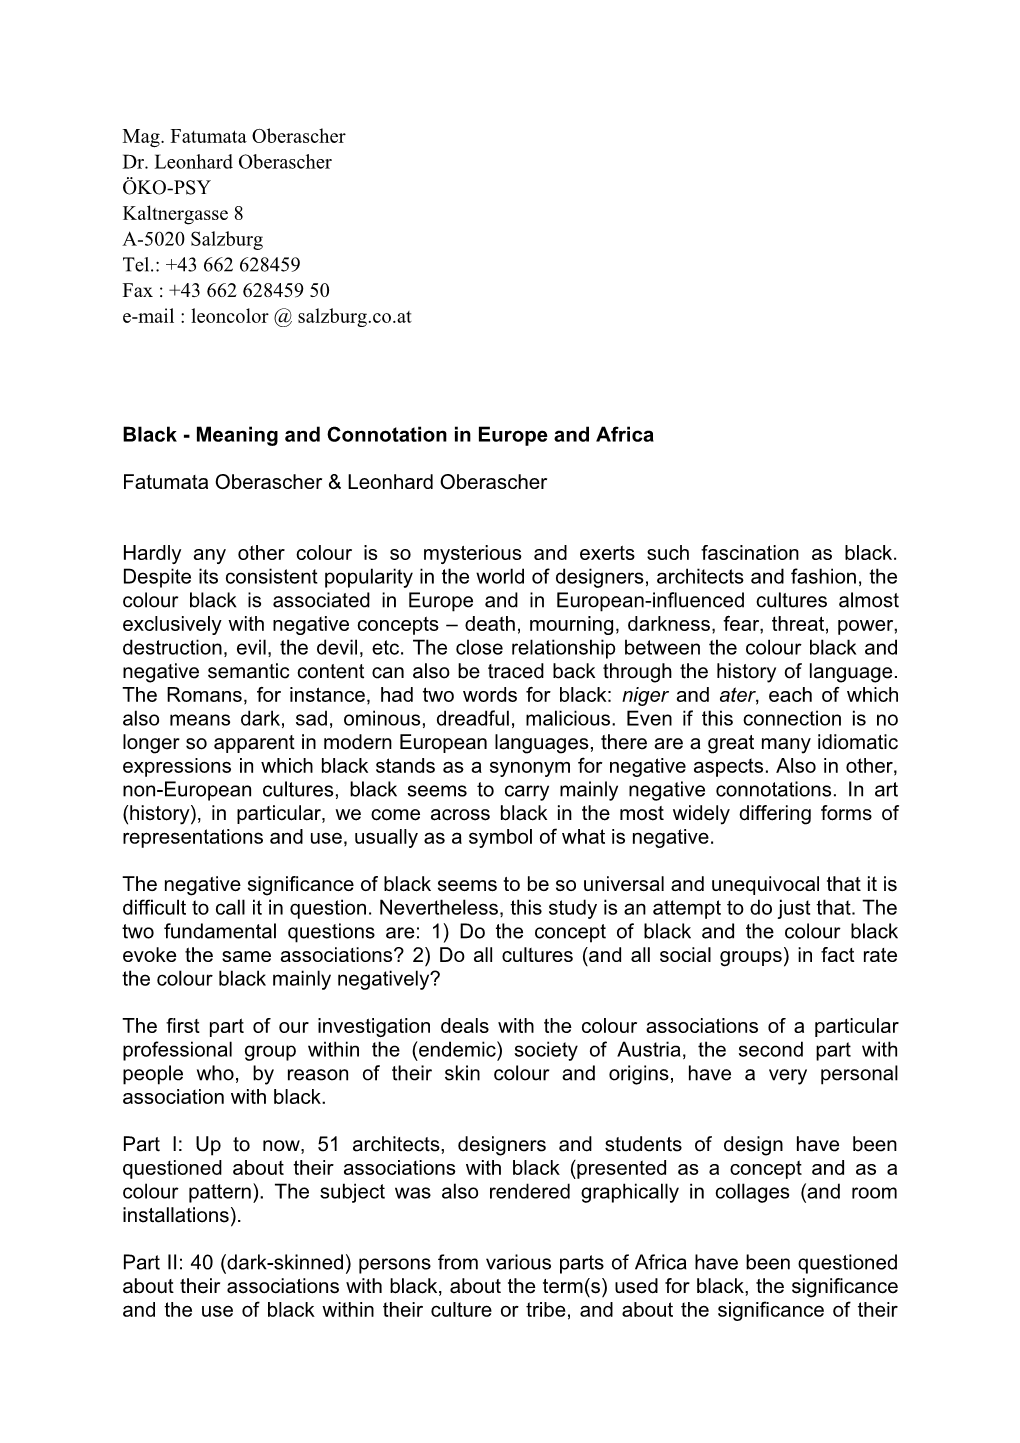 Black - Meaning And Connotation In Europe And Africa